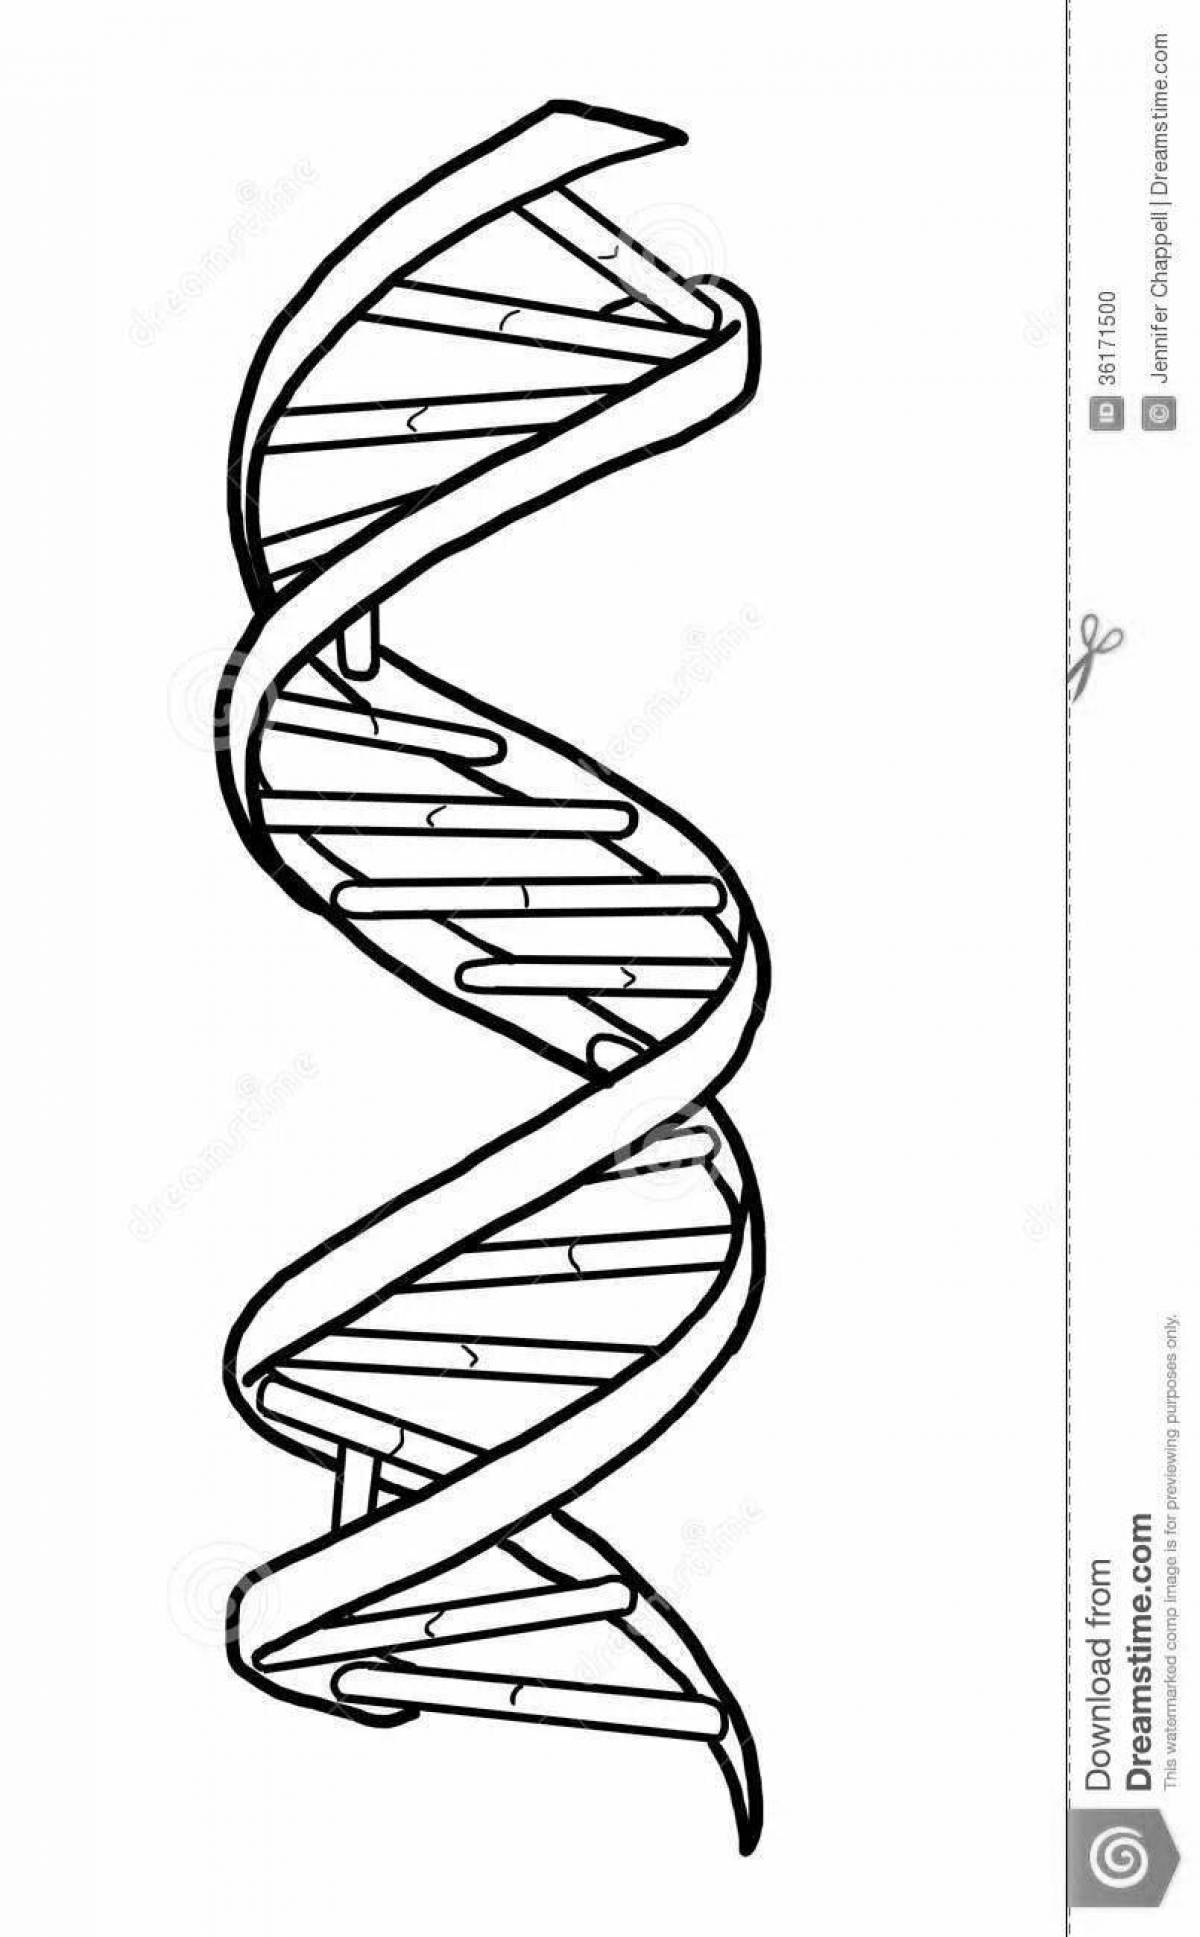 Bright dna coloring page